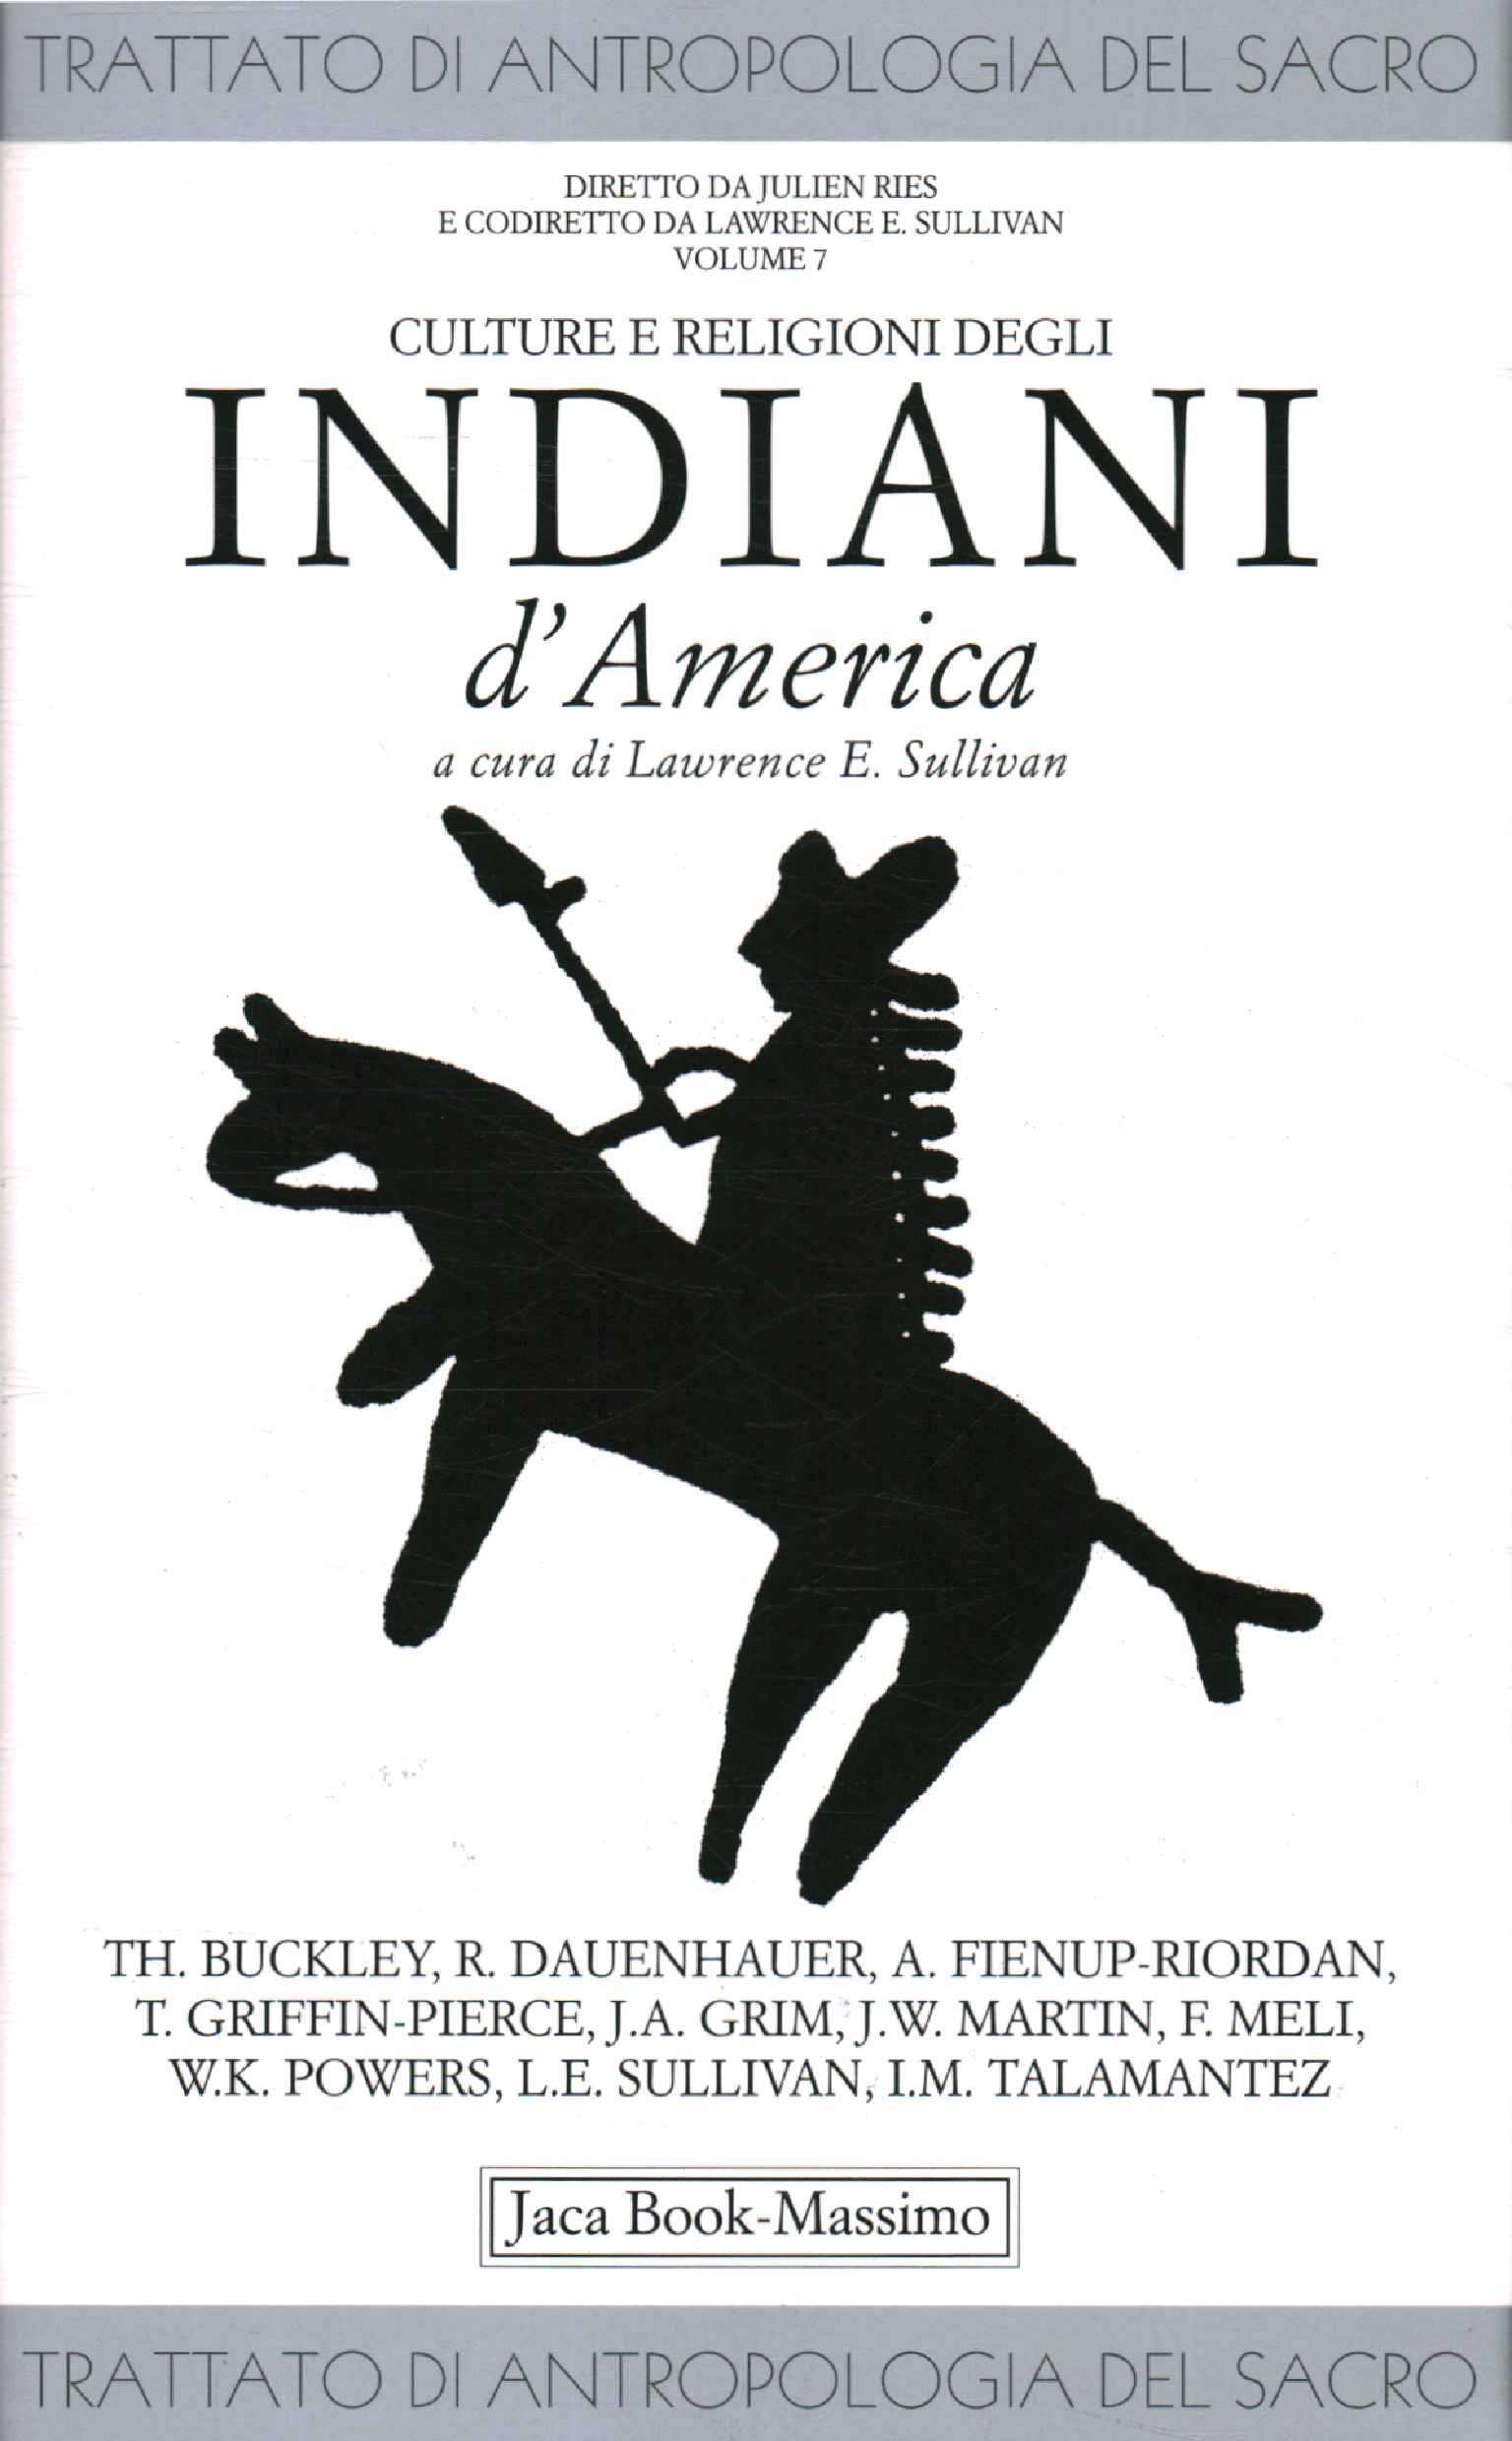 Cultures and religions of the Indians d0apos